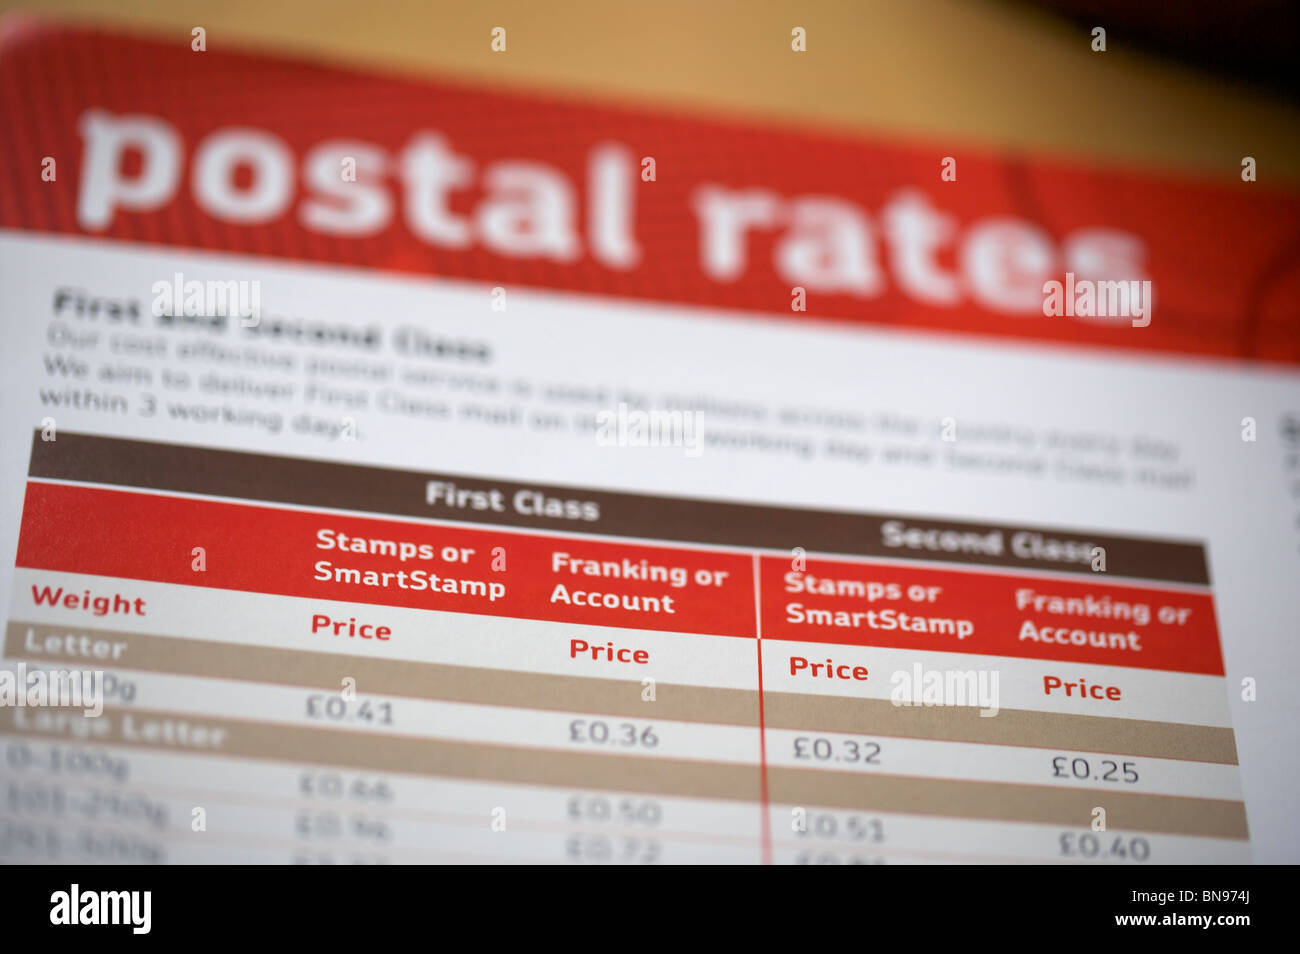 Royal Mail Postage Rates Chart